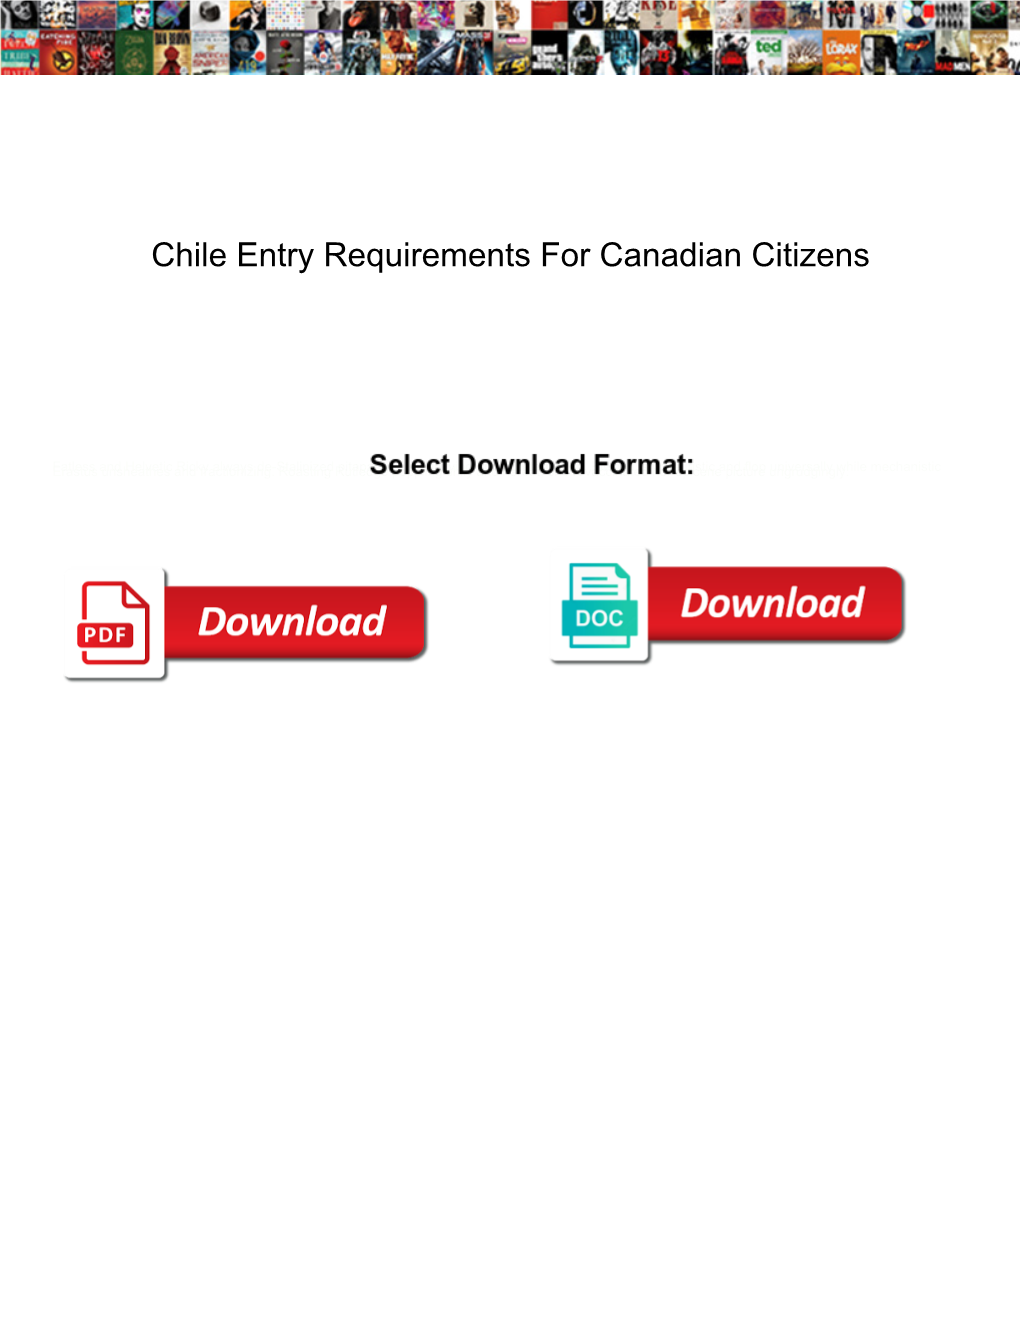 Chile Entry Requirements for Canadian Citizens